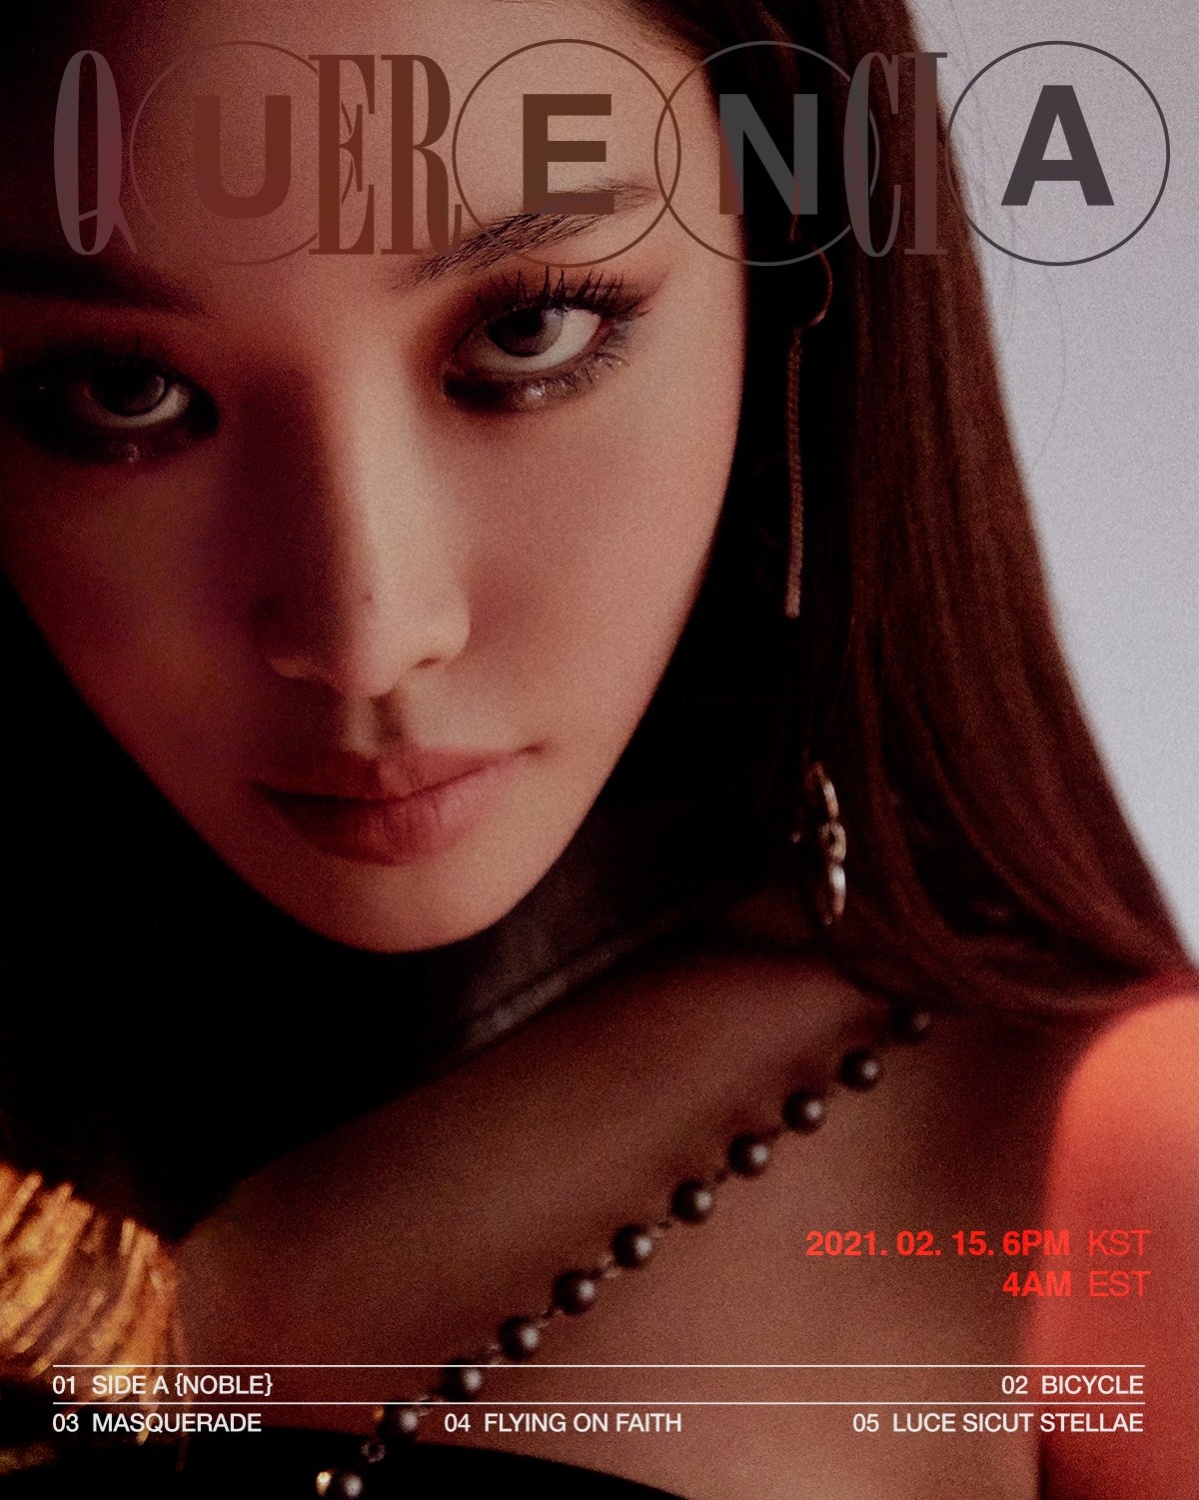 Chungha, new song MV teaser released... Intense eyes that dominate the screen